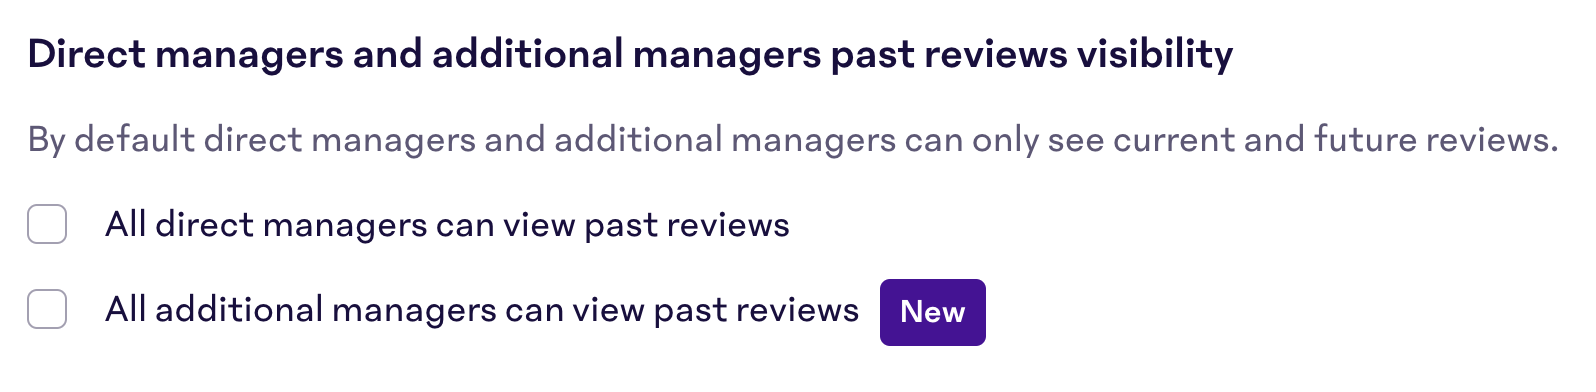 Past-Reviews-Visibility.png